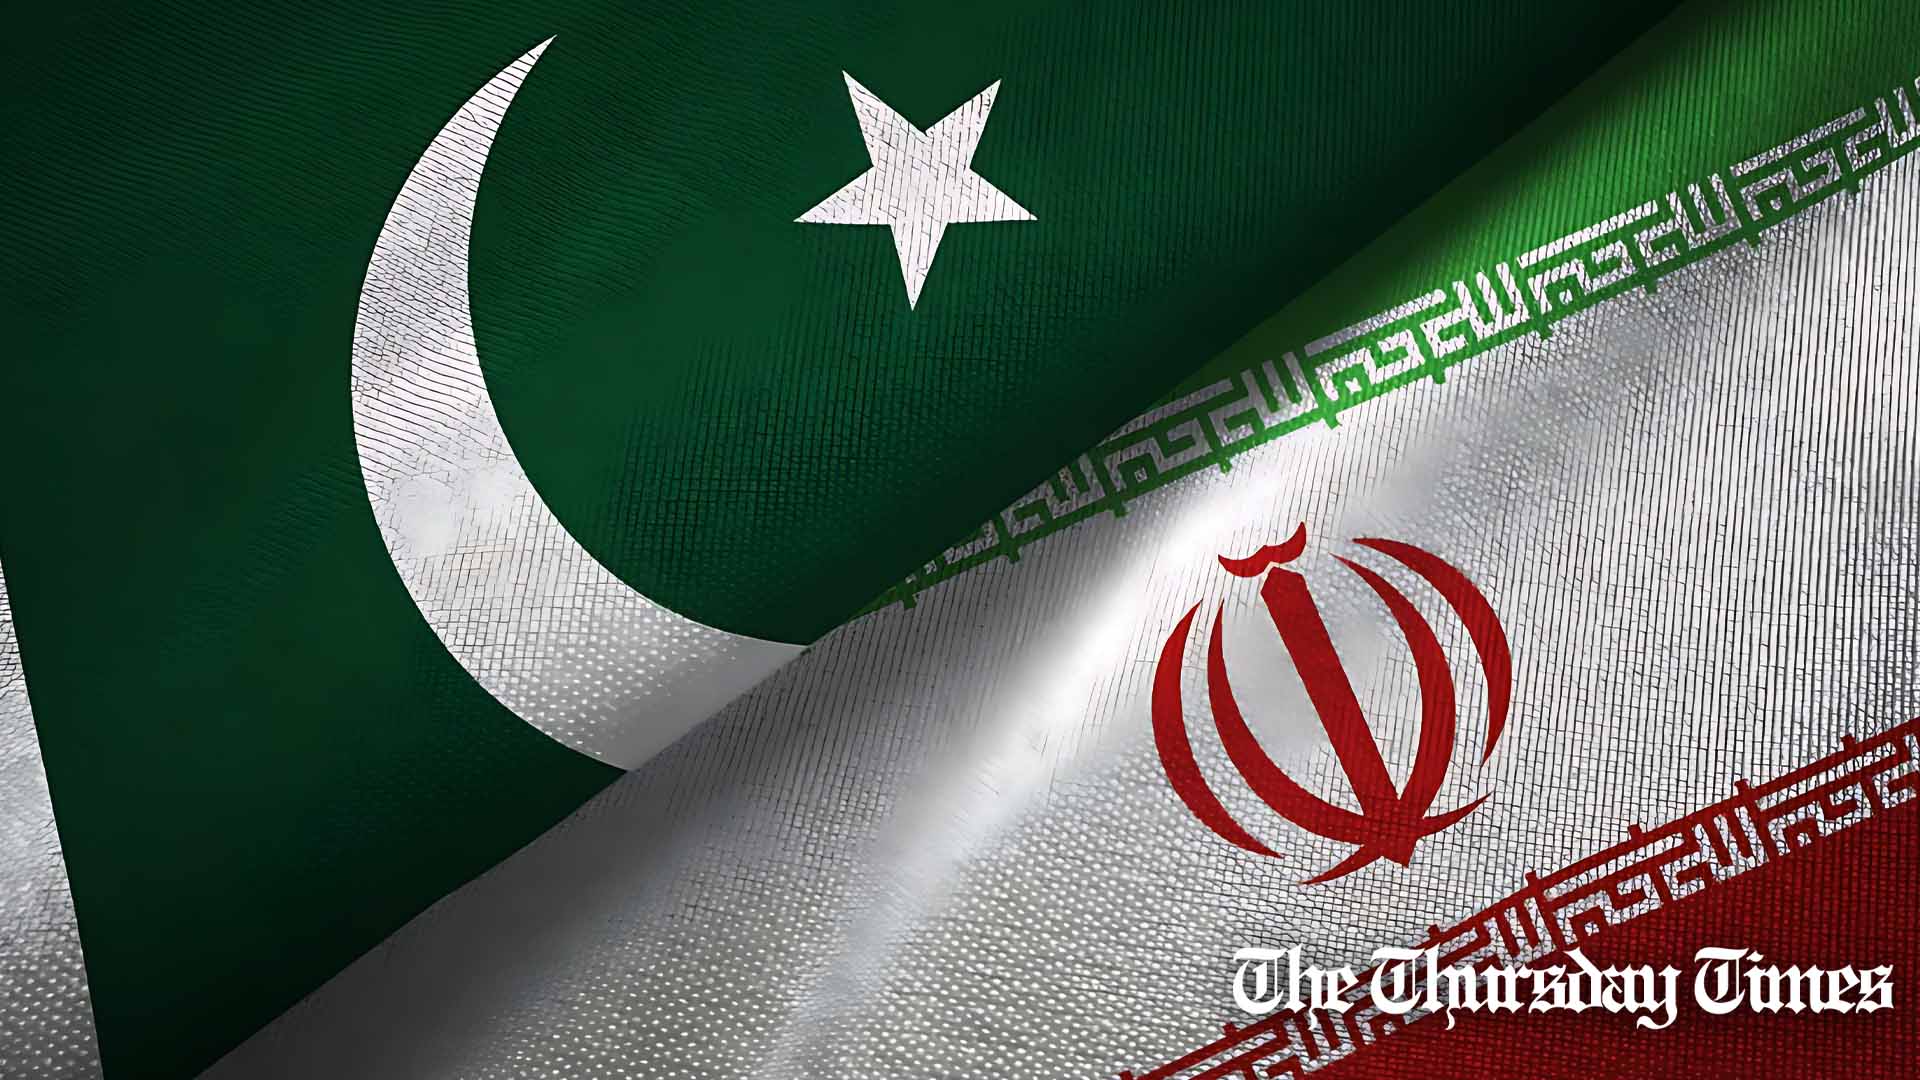 A file photo shows the flags of Pakistan (top) and Iran. — FILE/THE THURSDAY TIMES